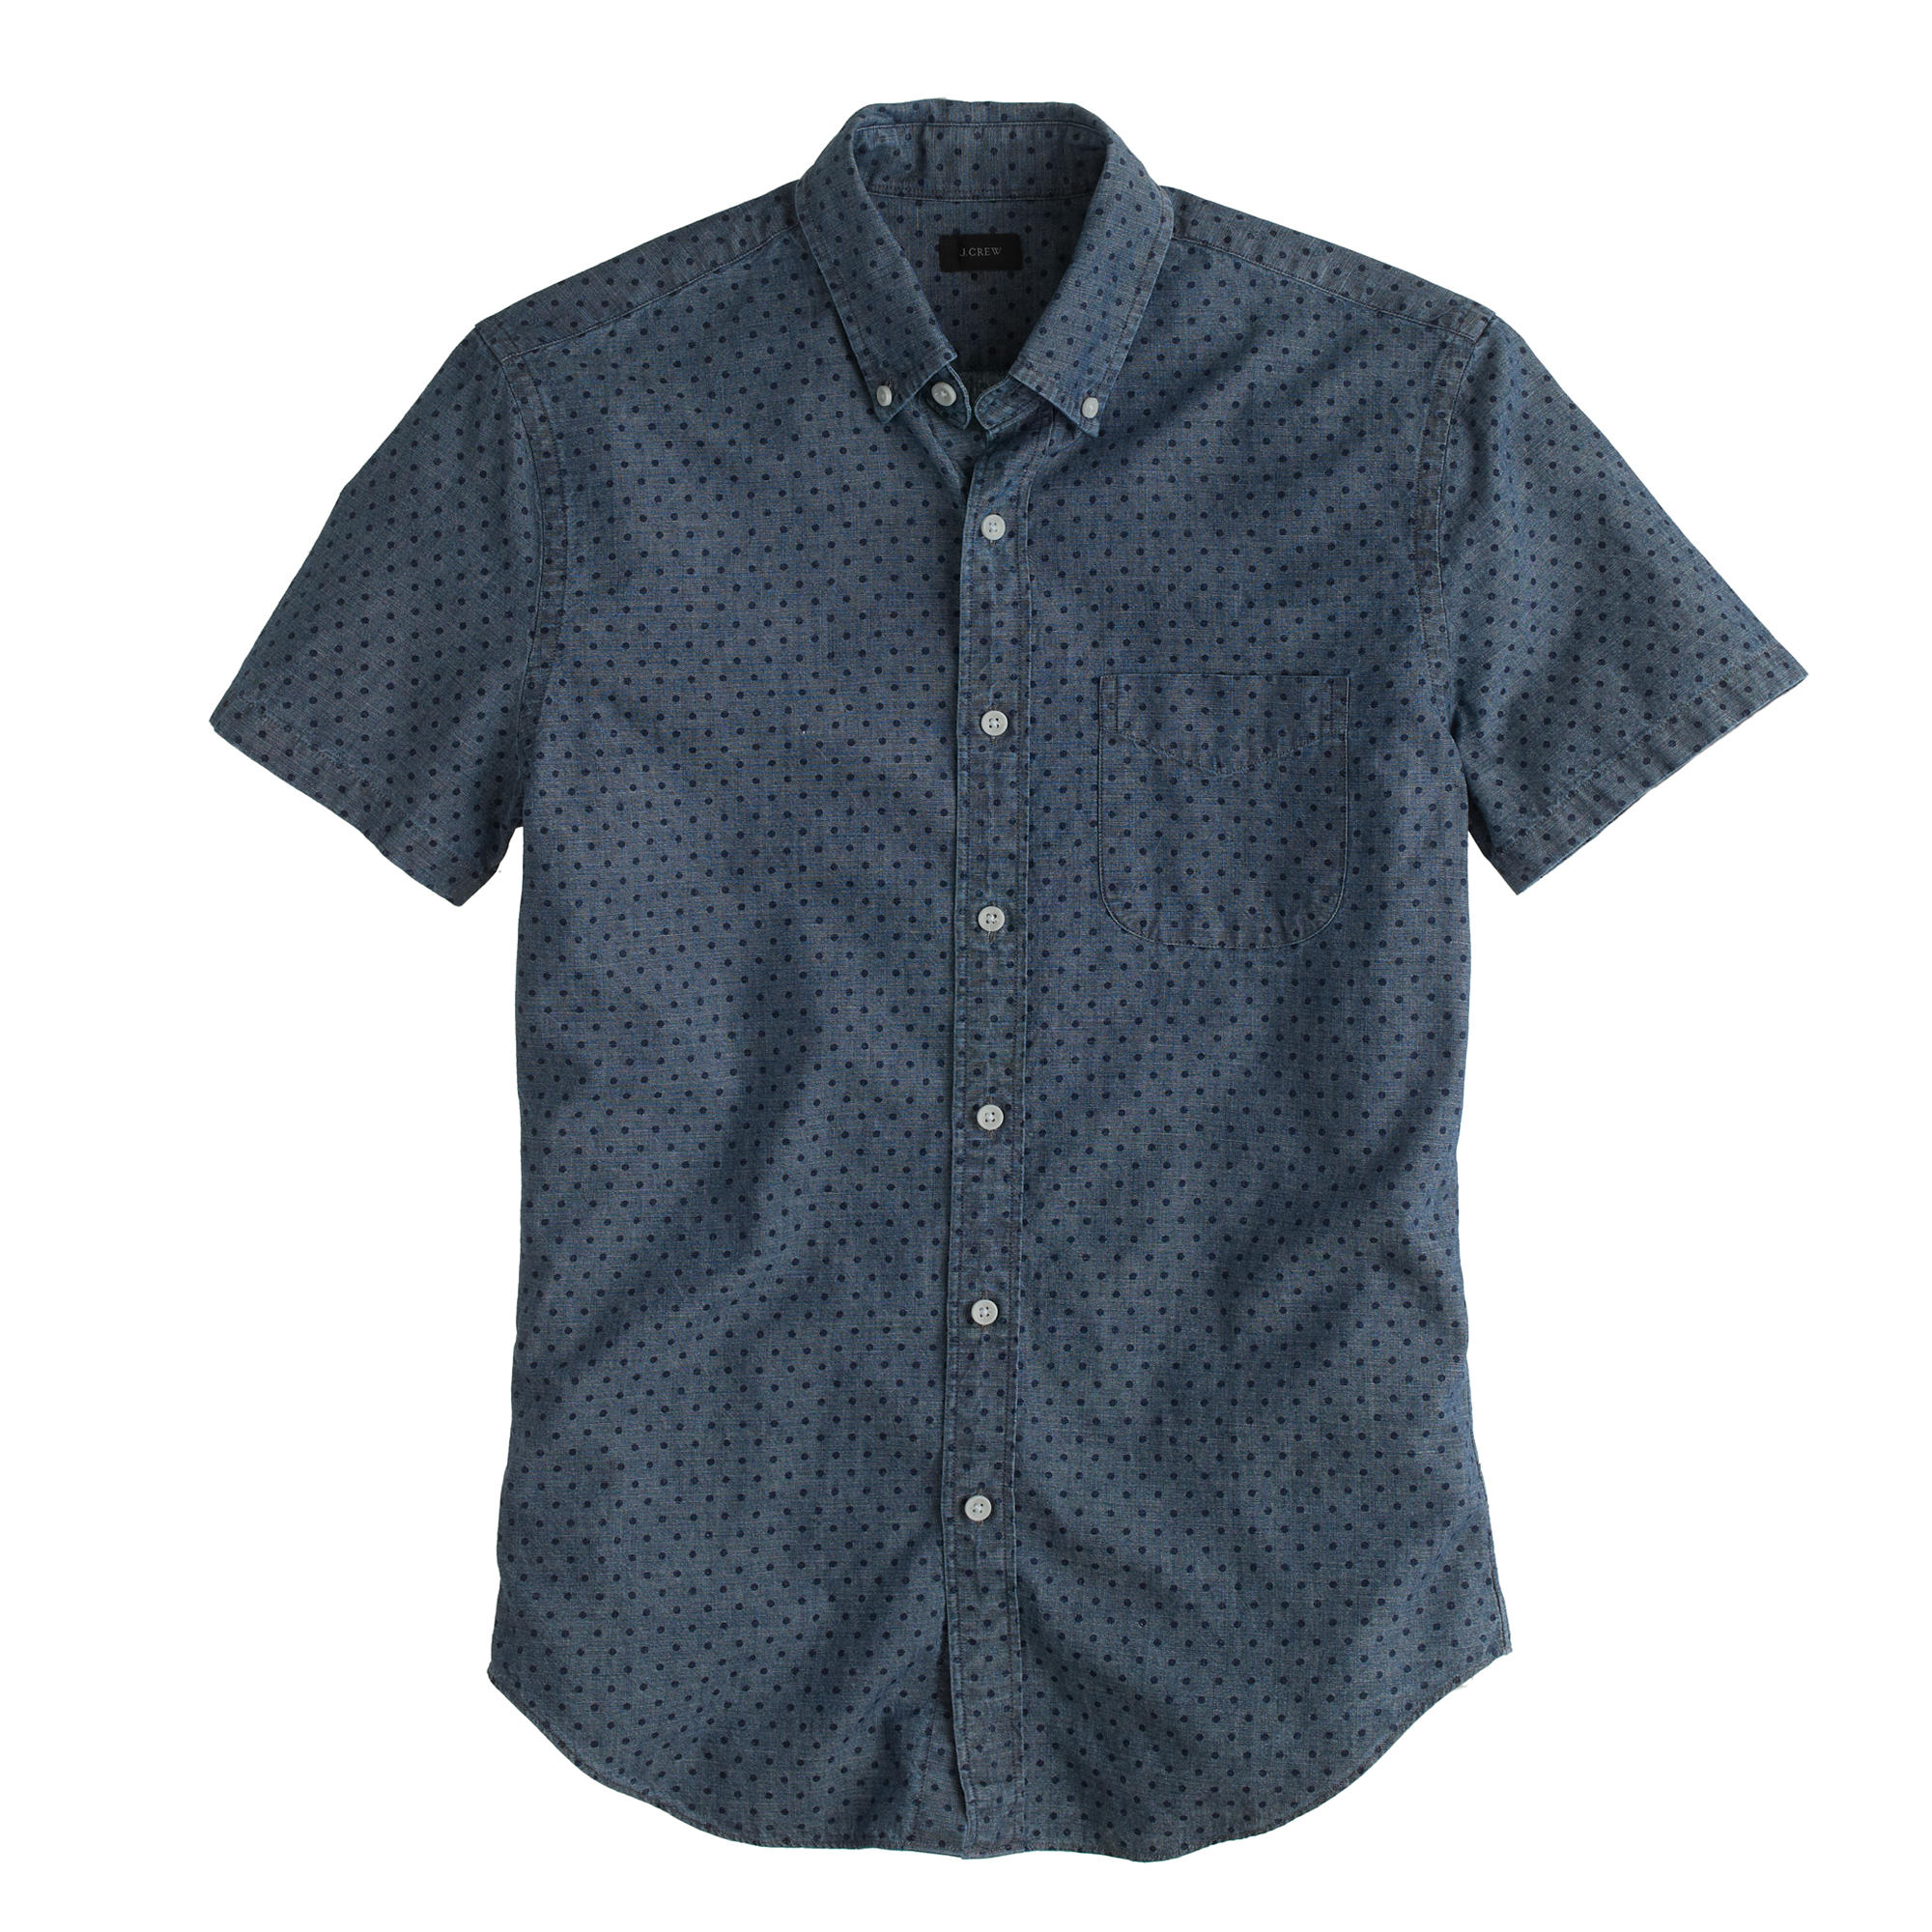 Lyst - J.Crew Chambray Short-sleeve Shirt In Classic Navy Dot in Blue ...